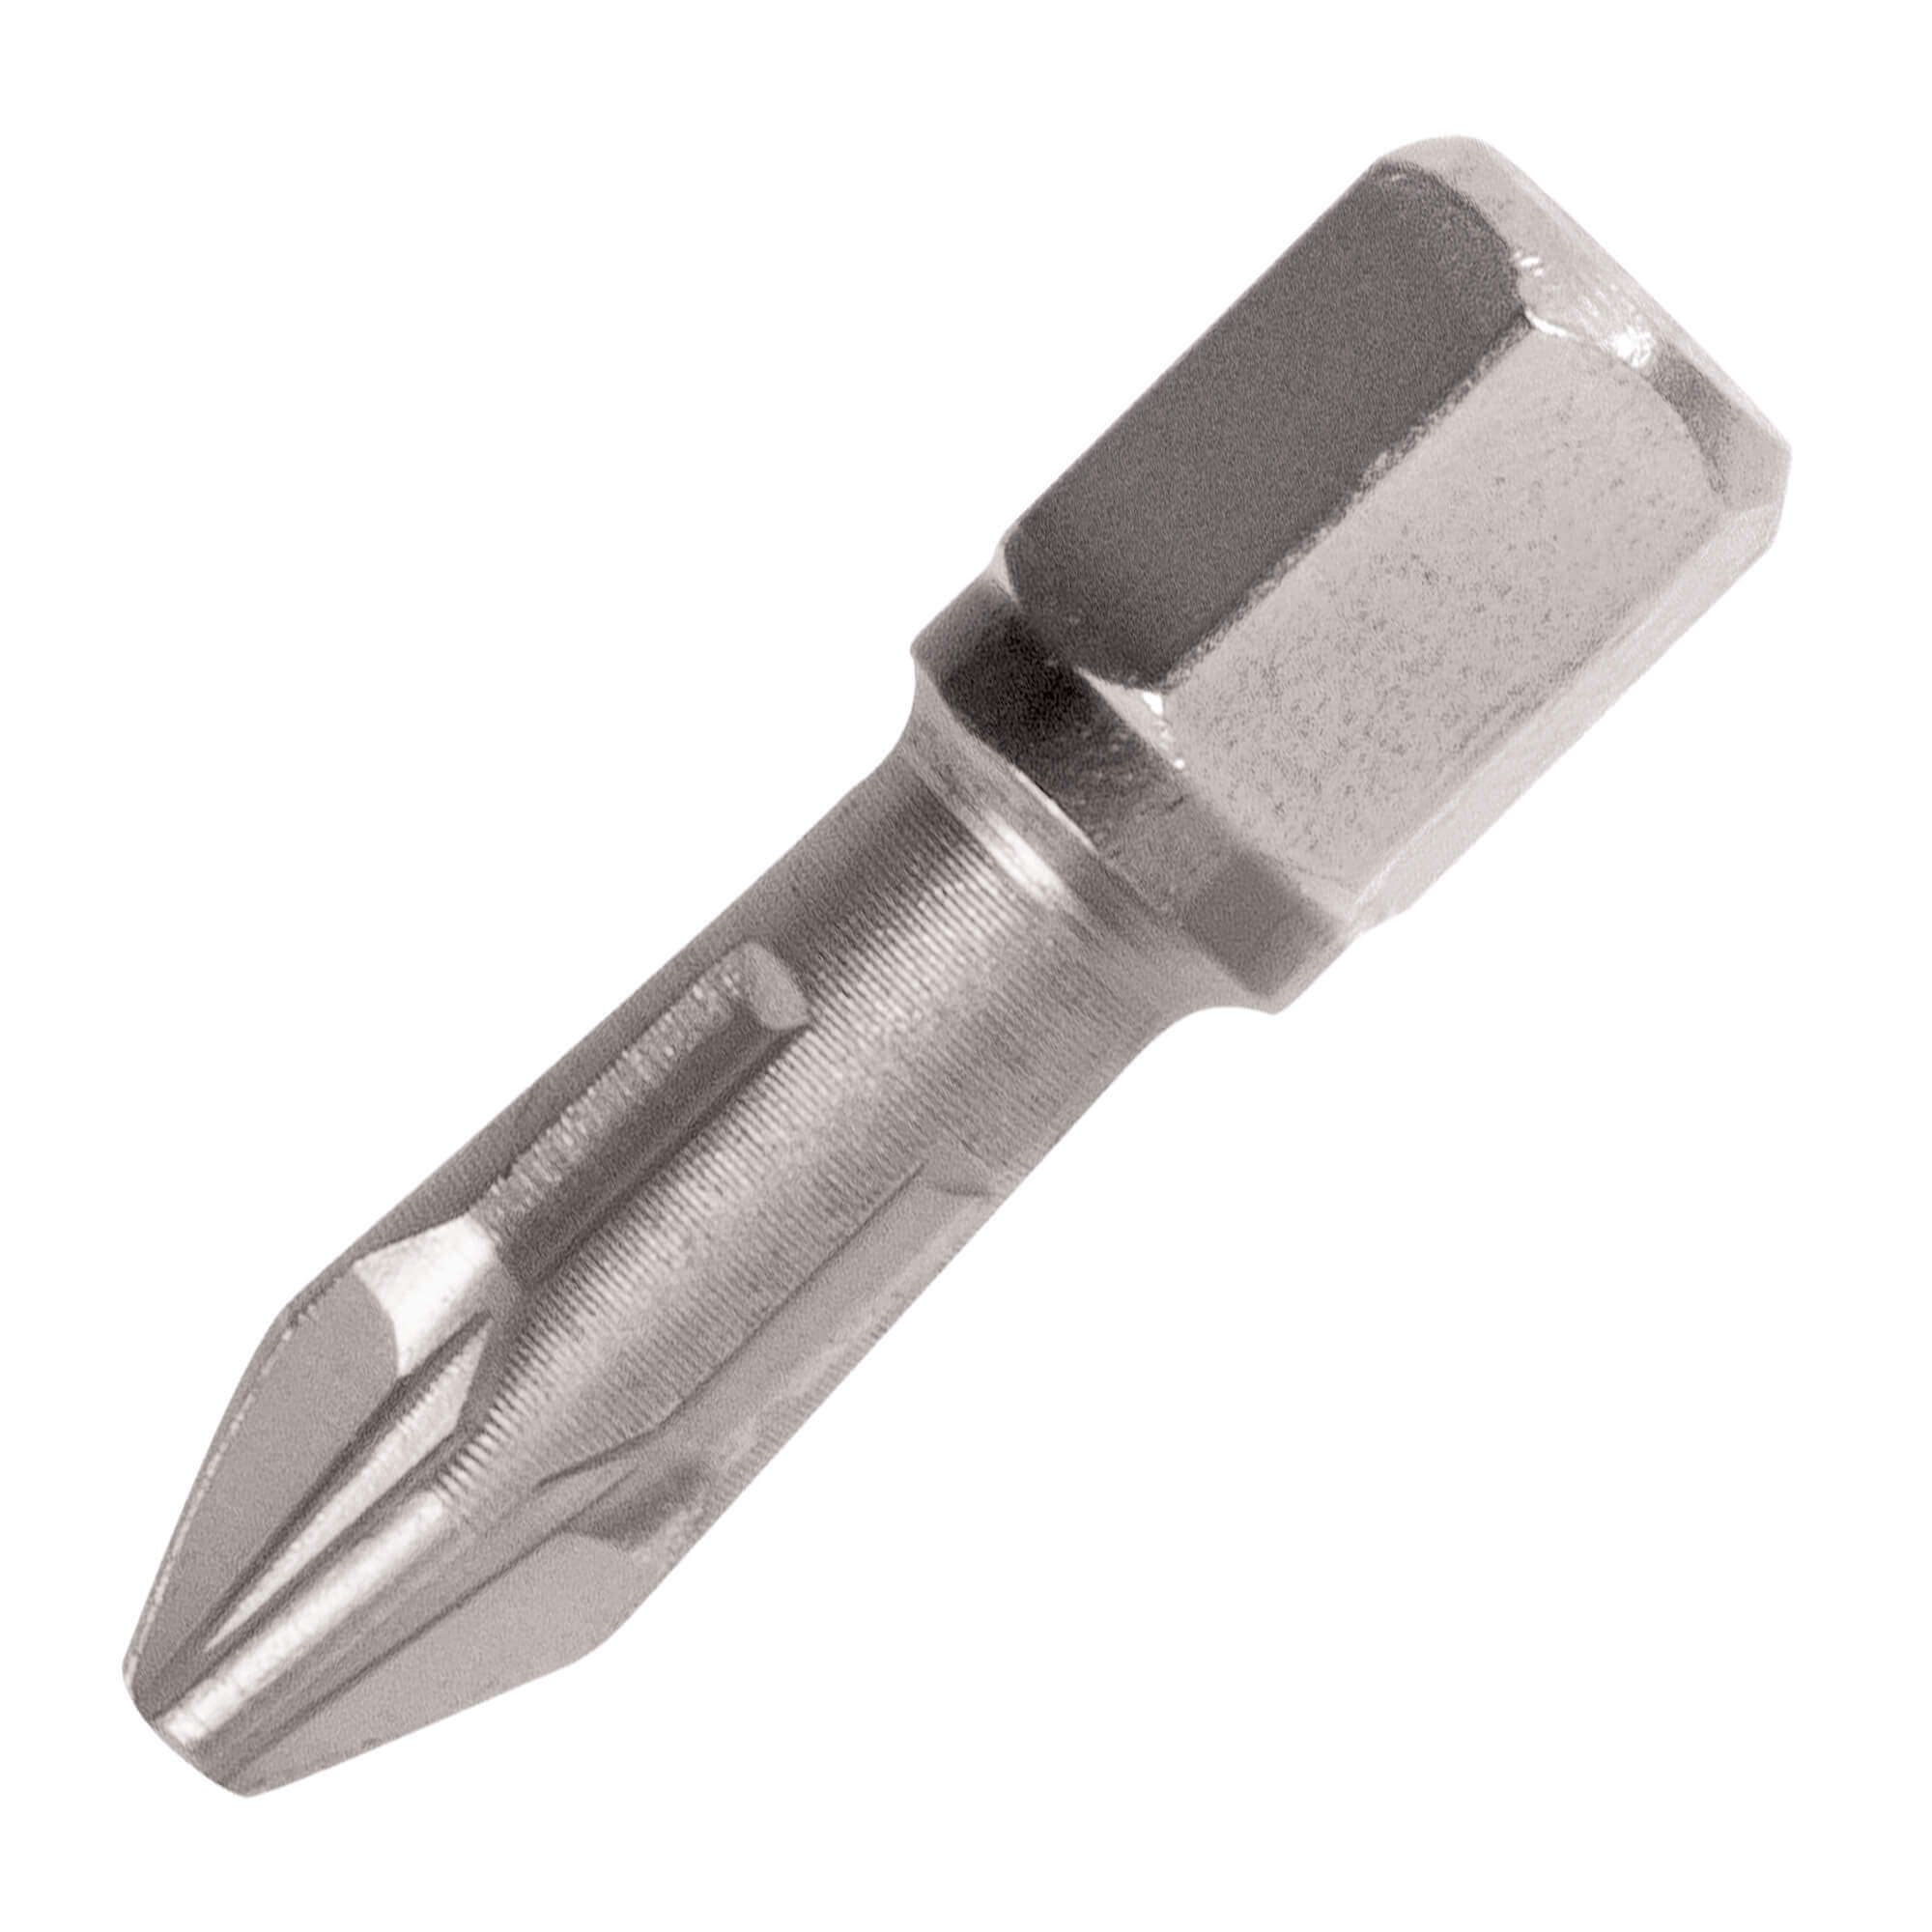 Photo of Trend Snappy Tin Coated Pozi Screwdriver Bits Pz0 25mm Pack Of 3